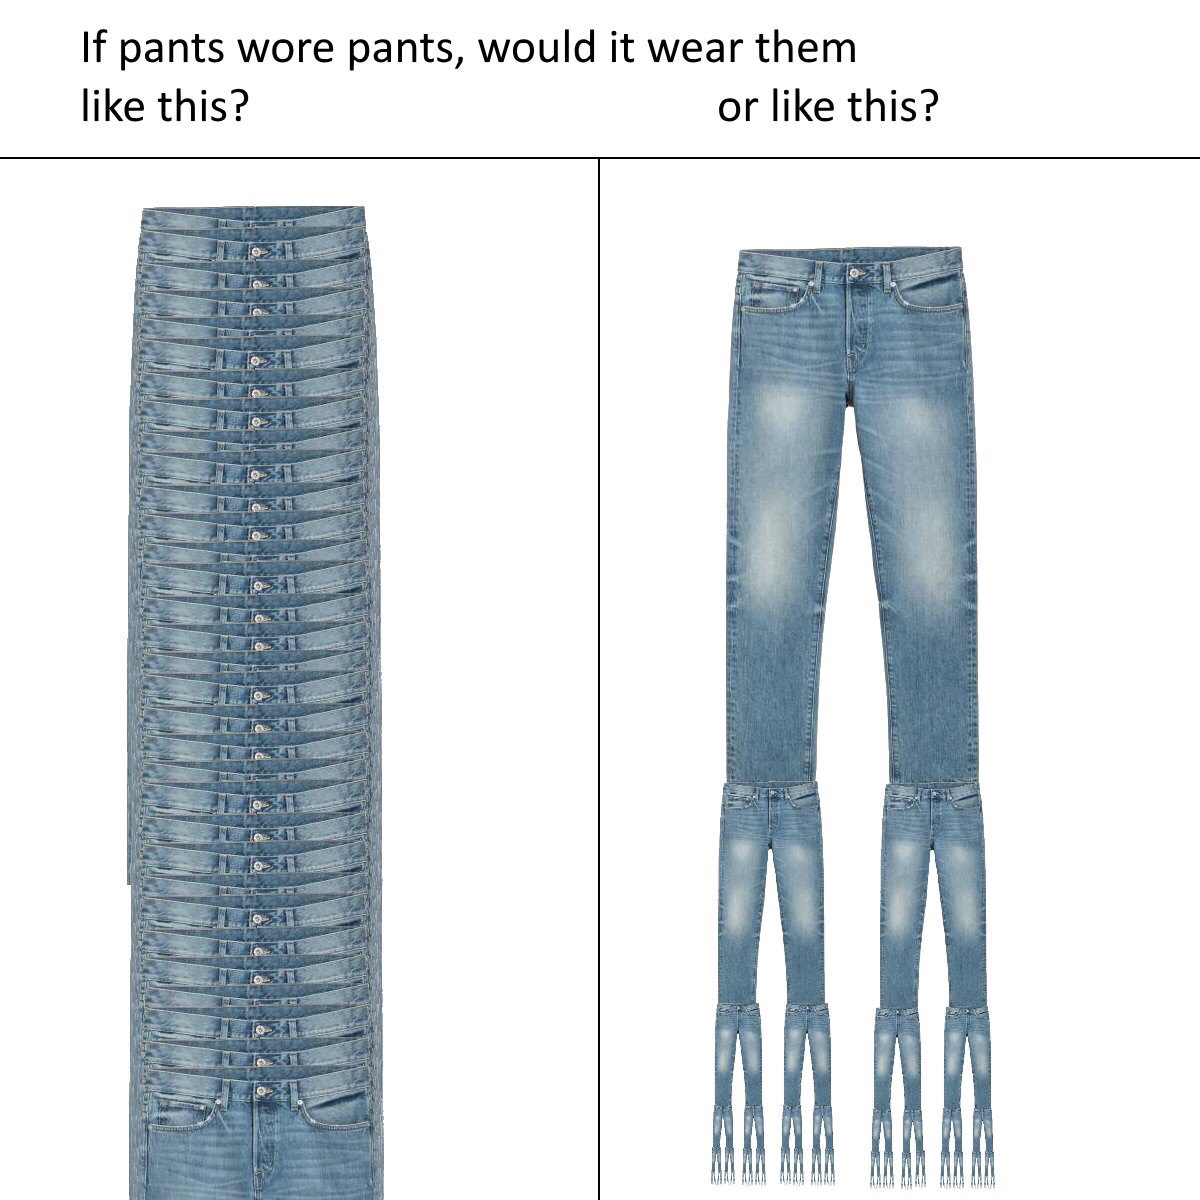 if pants wore pants - If pants wore pants, would it wear them this? or this?